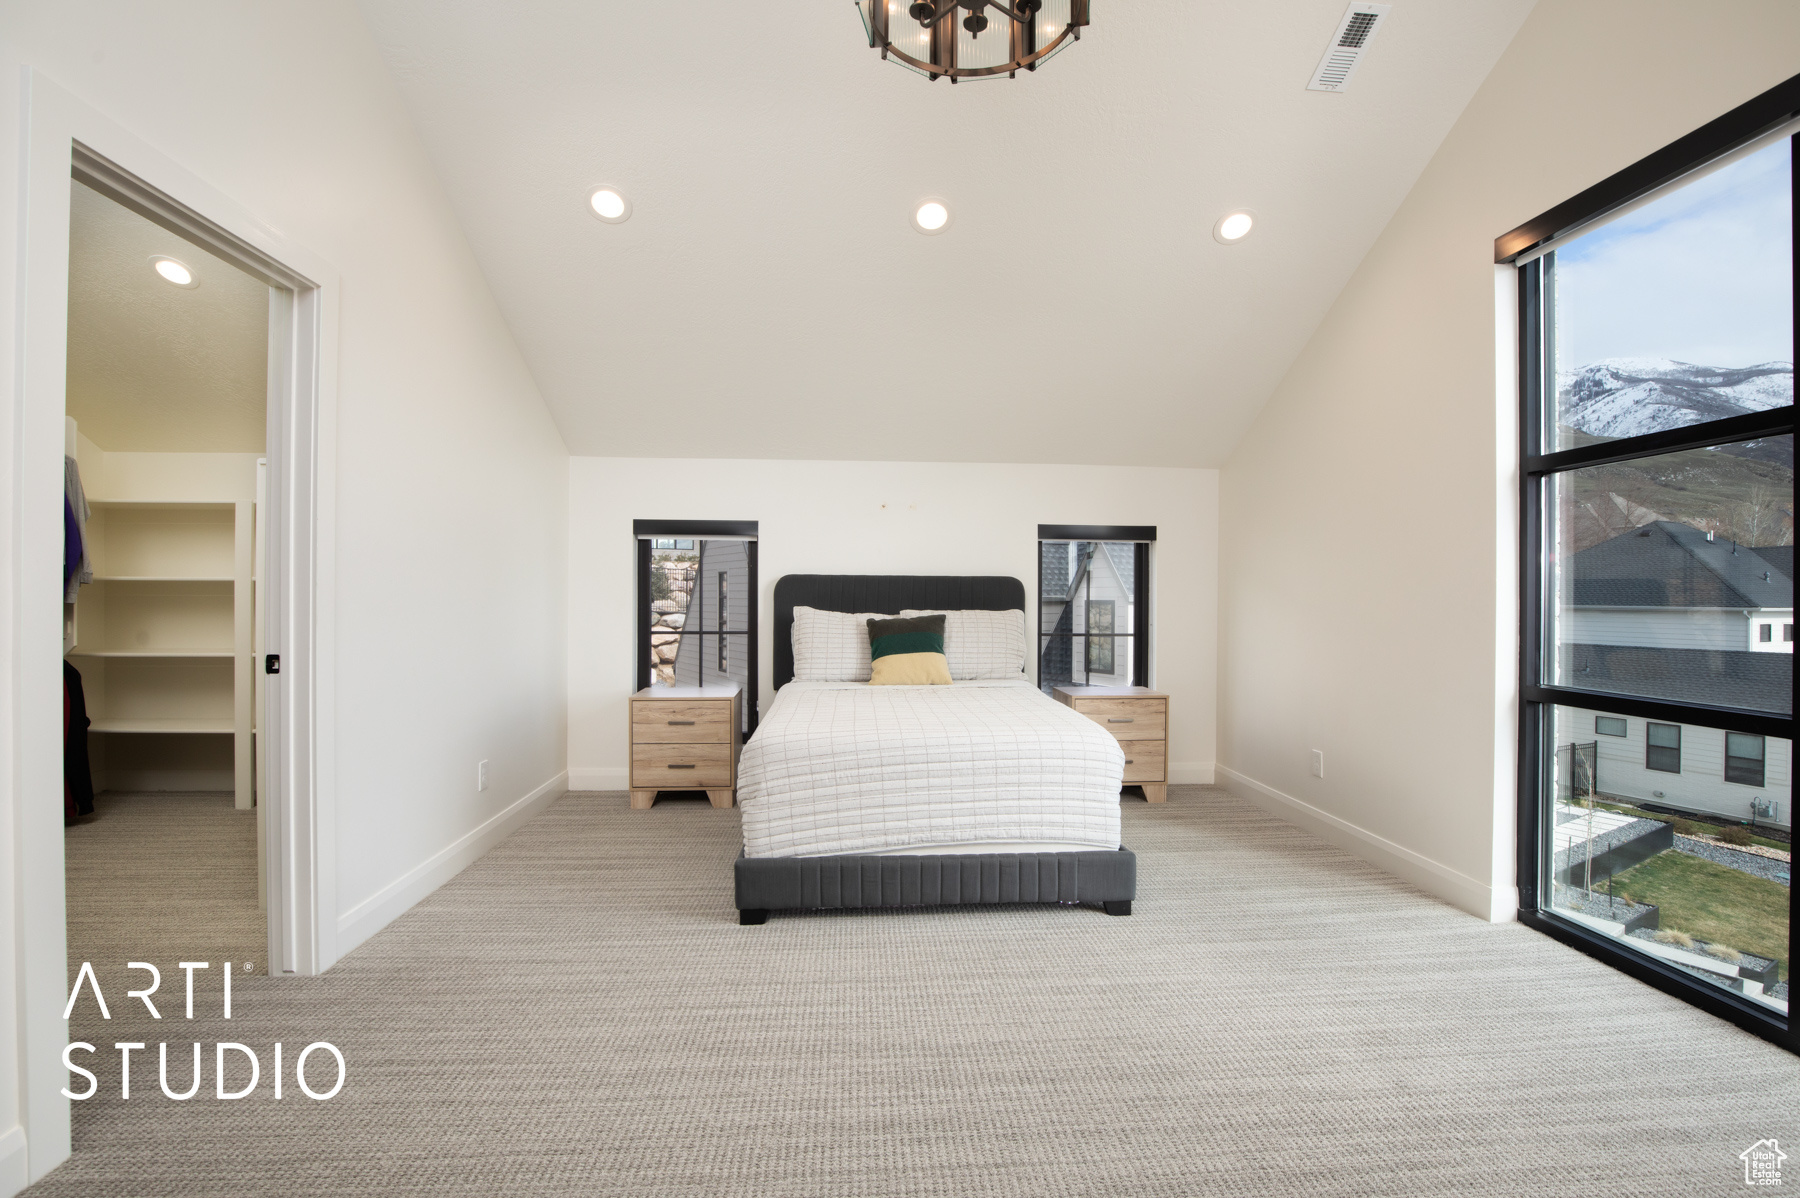 Bedroom featuring a spacious closet, lofted ceiling, an inviting chandelier, and light colored carpet